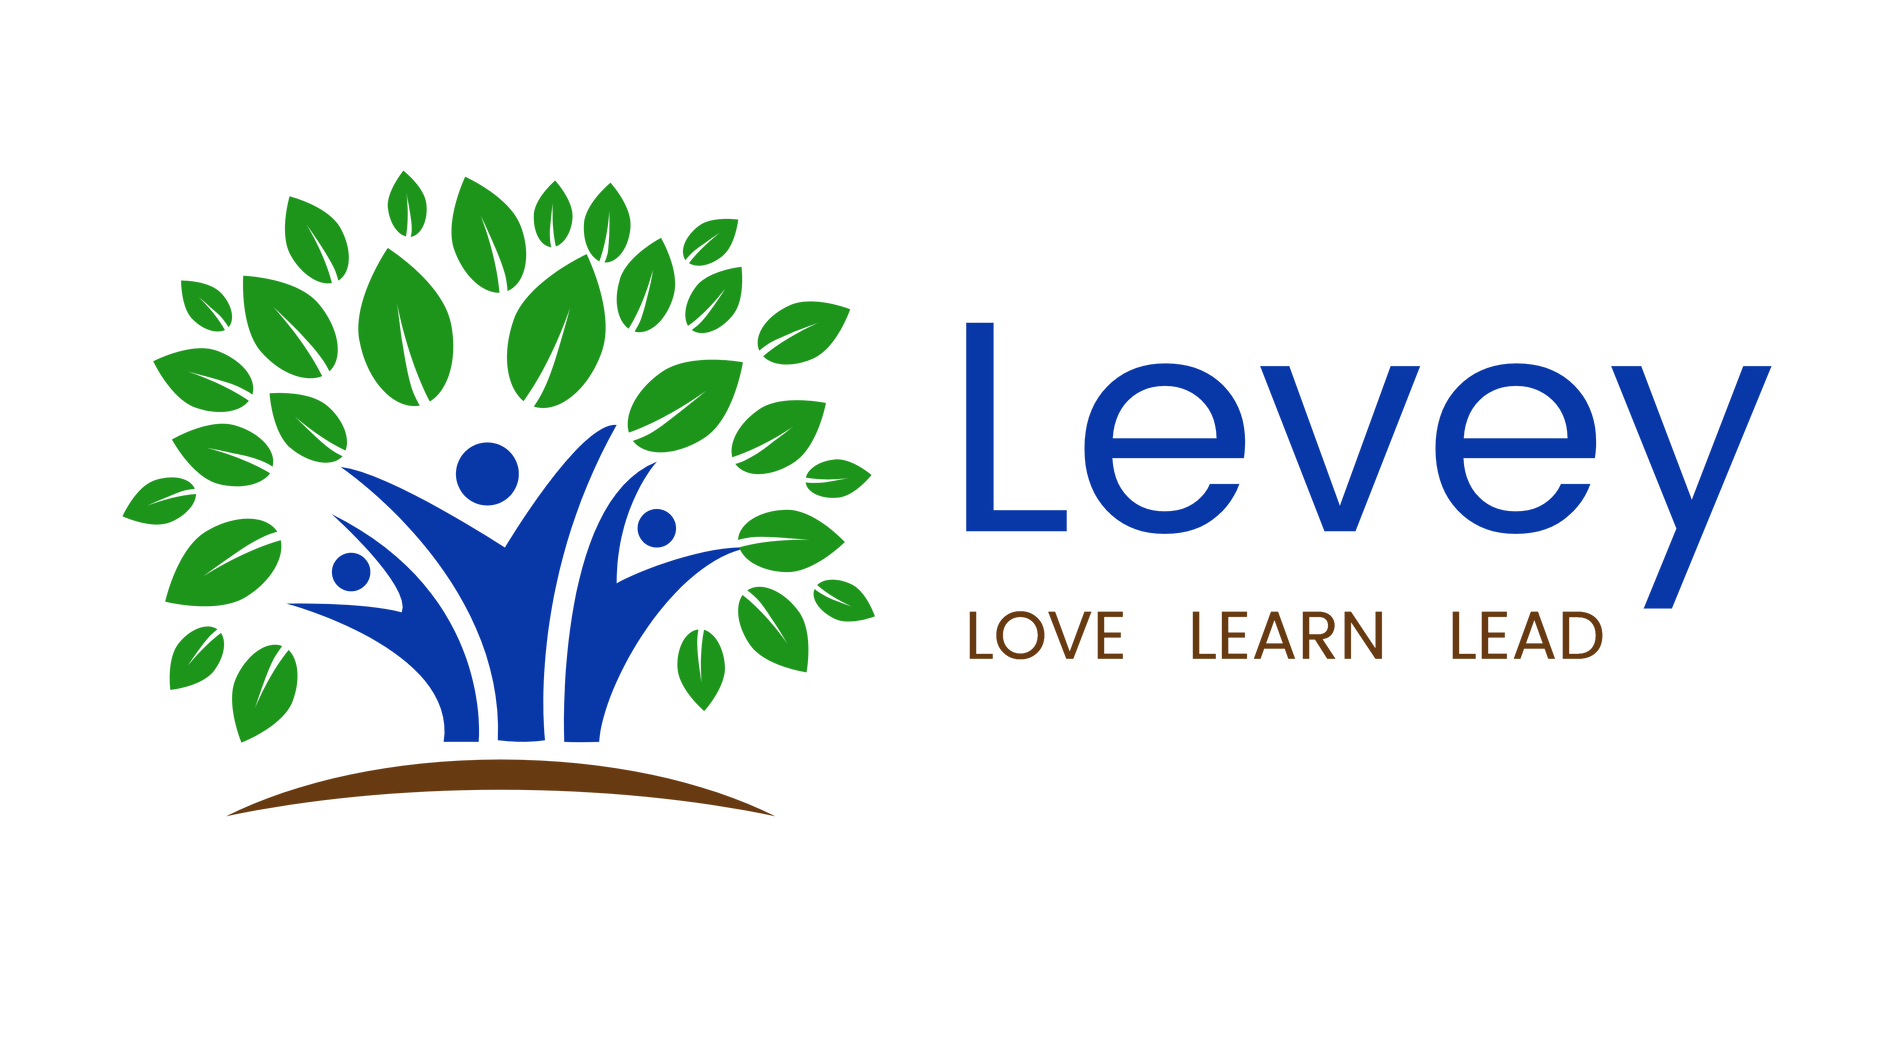 WHY LEVEY IS THE SCHOOL OF CHOICE